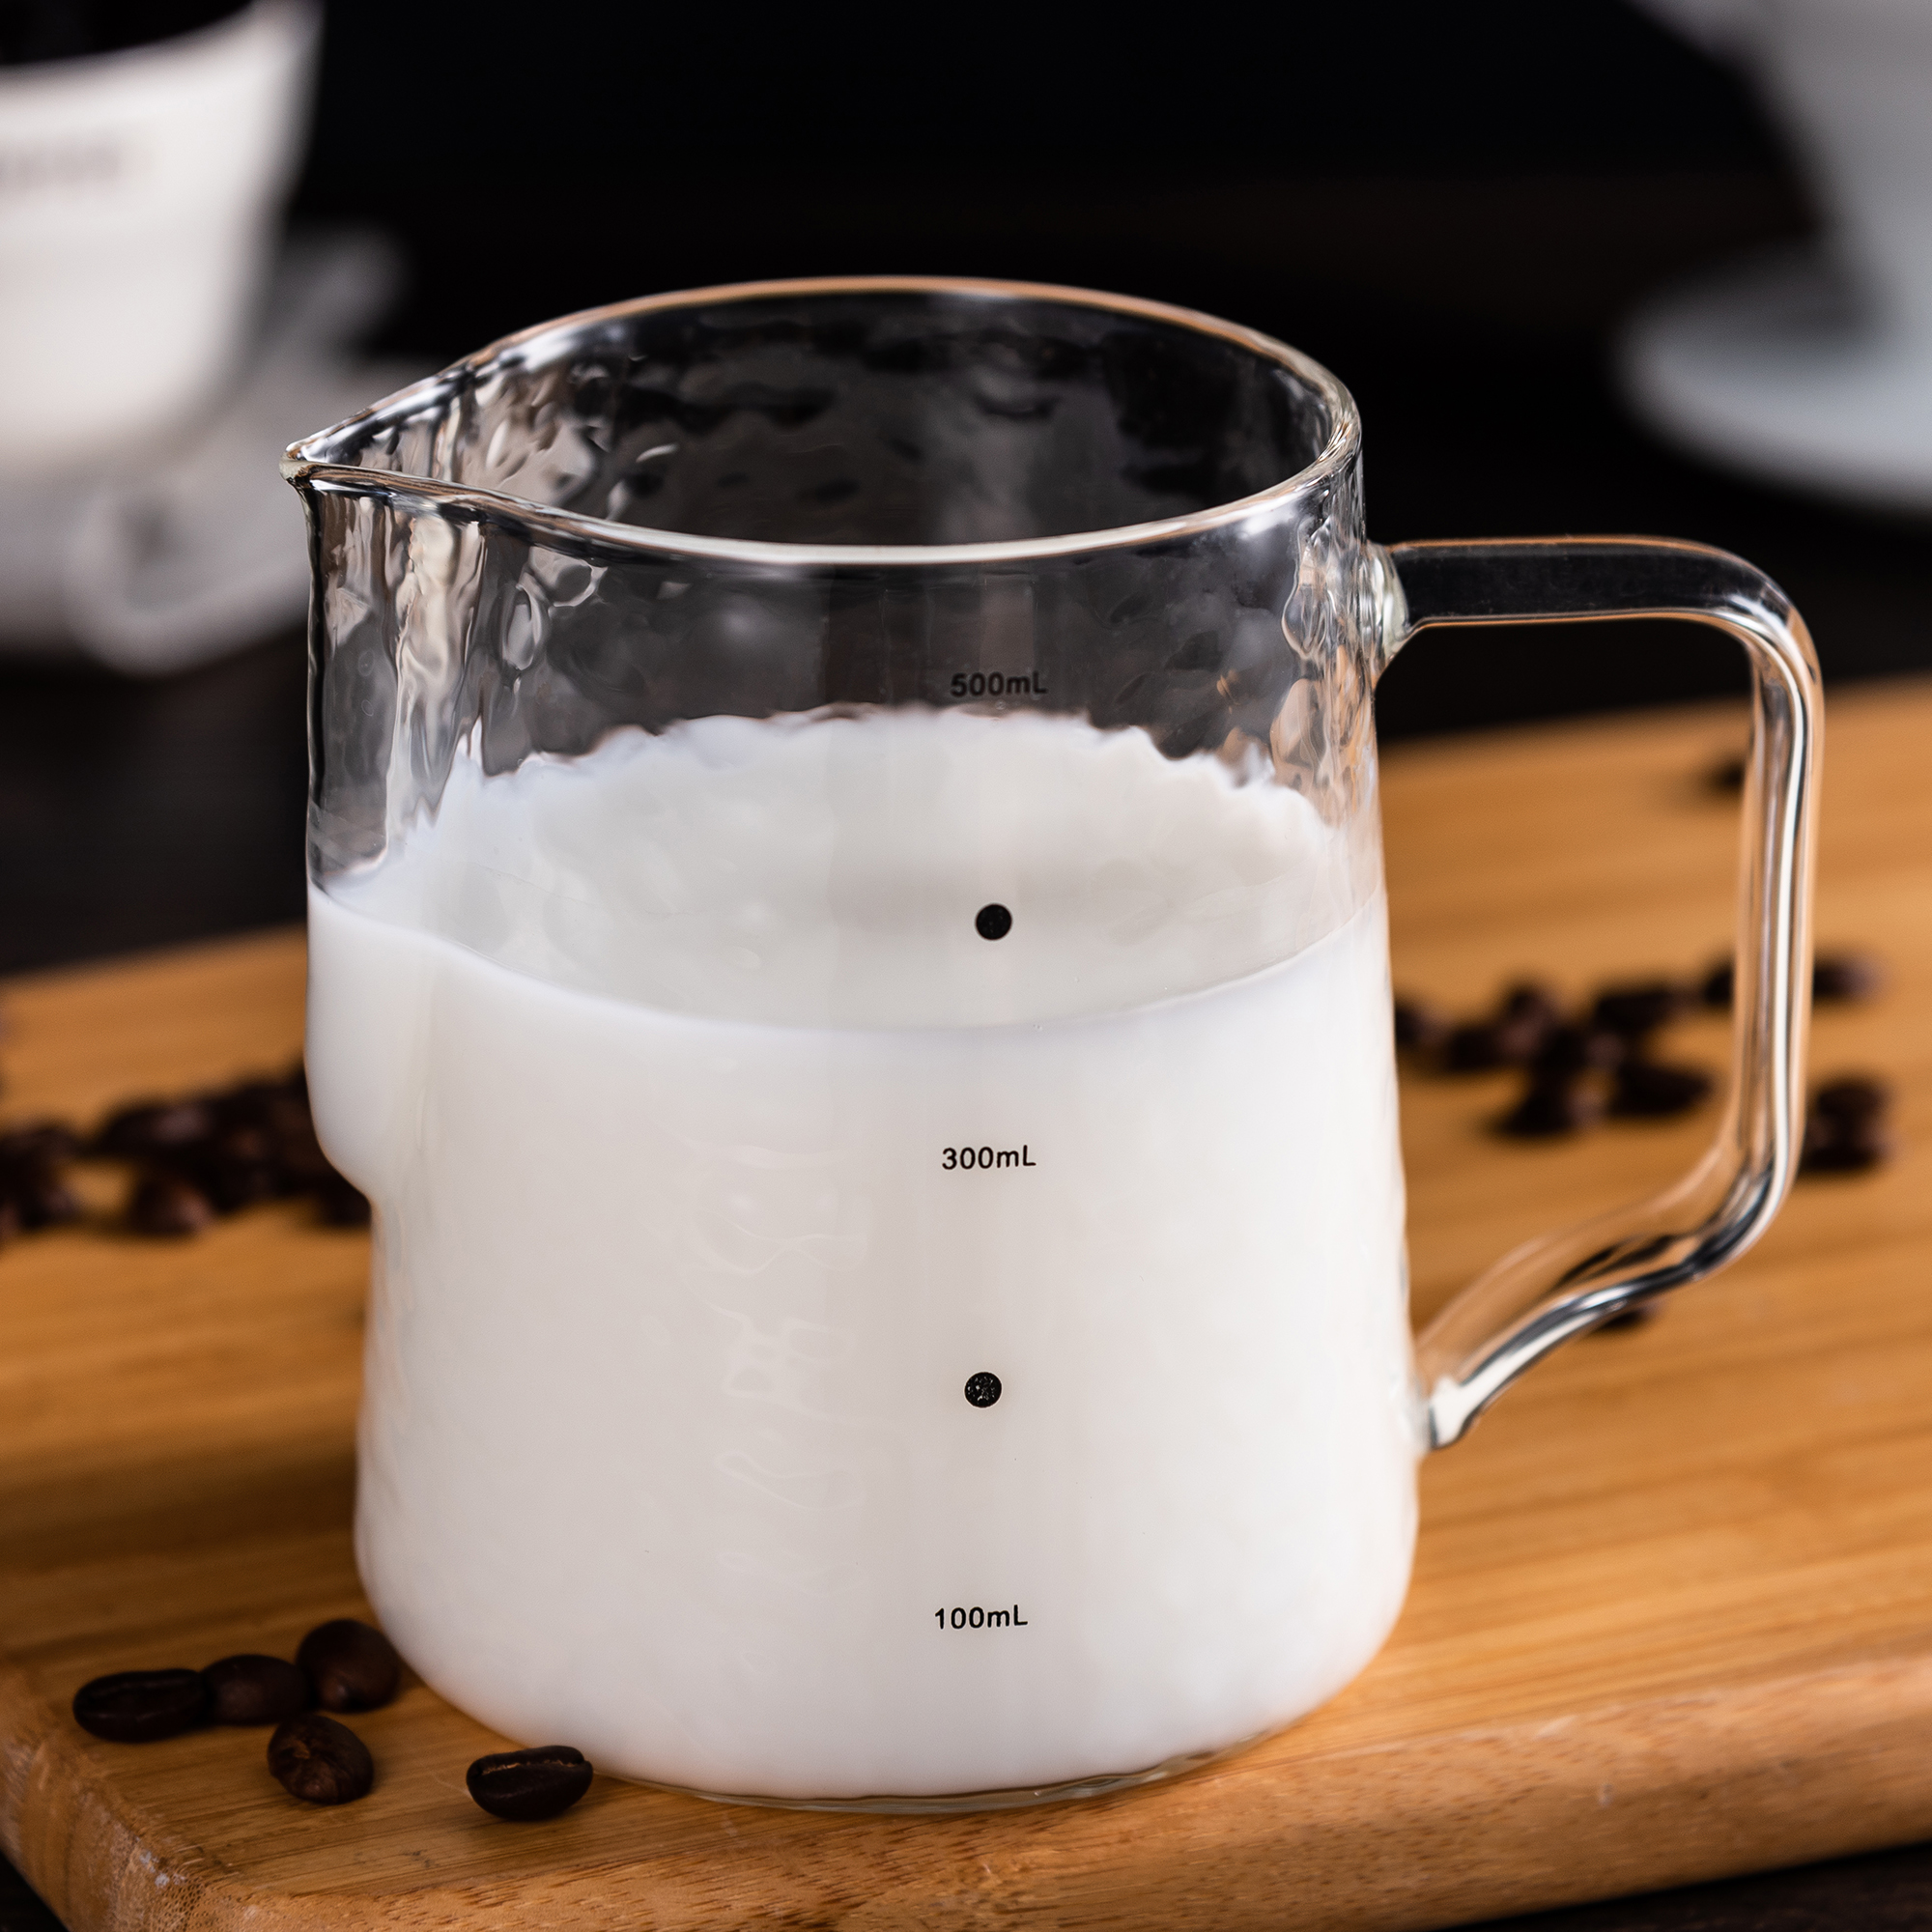 High Borosilicate Glass Milk Frothing Pitcher with Measurement, 20oz/600ml Hammer Heat Resistant Glass Milk Coffee Cappuccino Latte Art Steaming